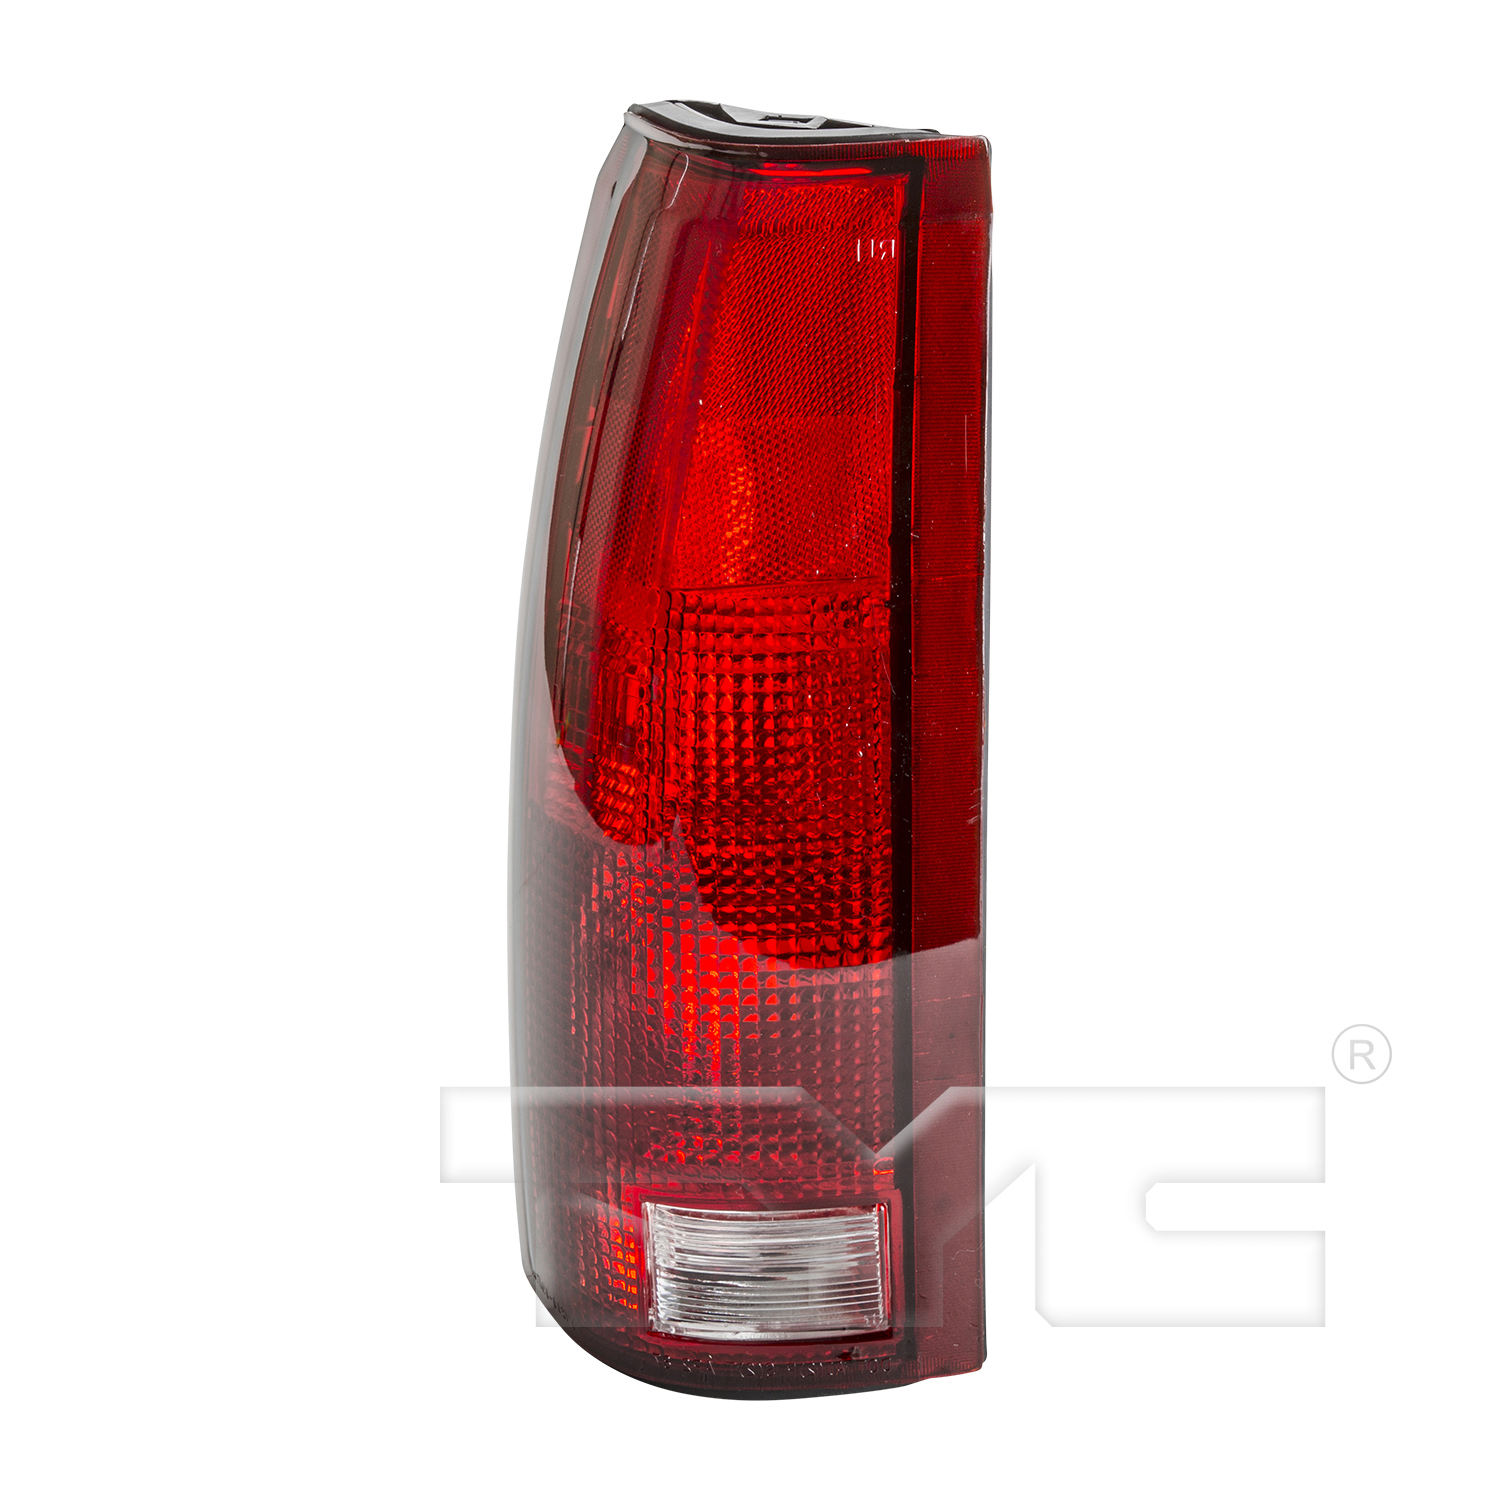 Aftermarket TAILLIGHTS for CHEVROLET - TAHOE, TAHOE,95-00,LT Taillamp lens